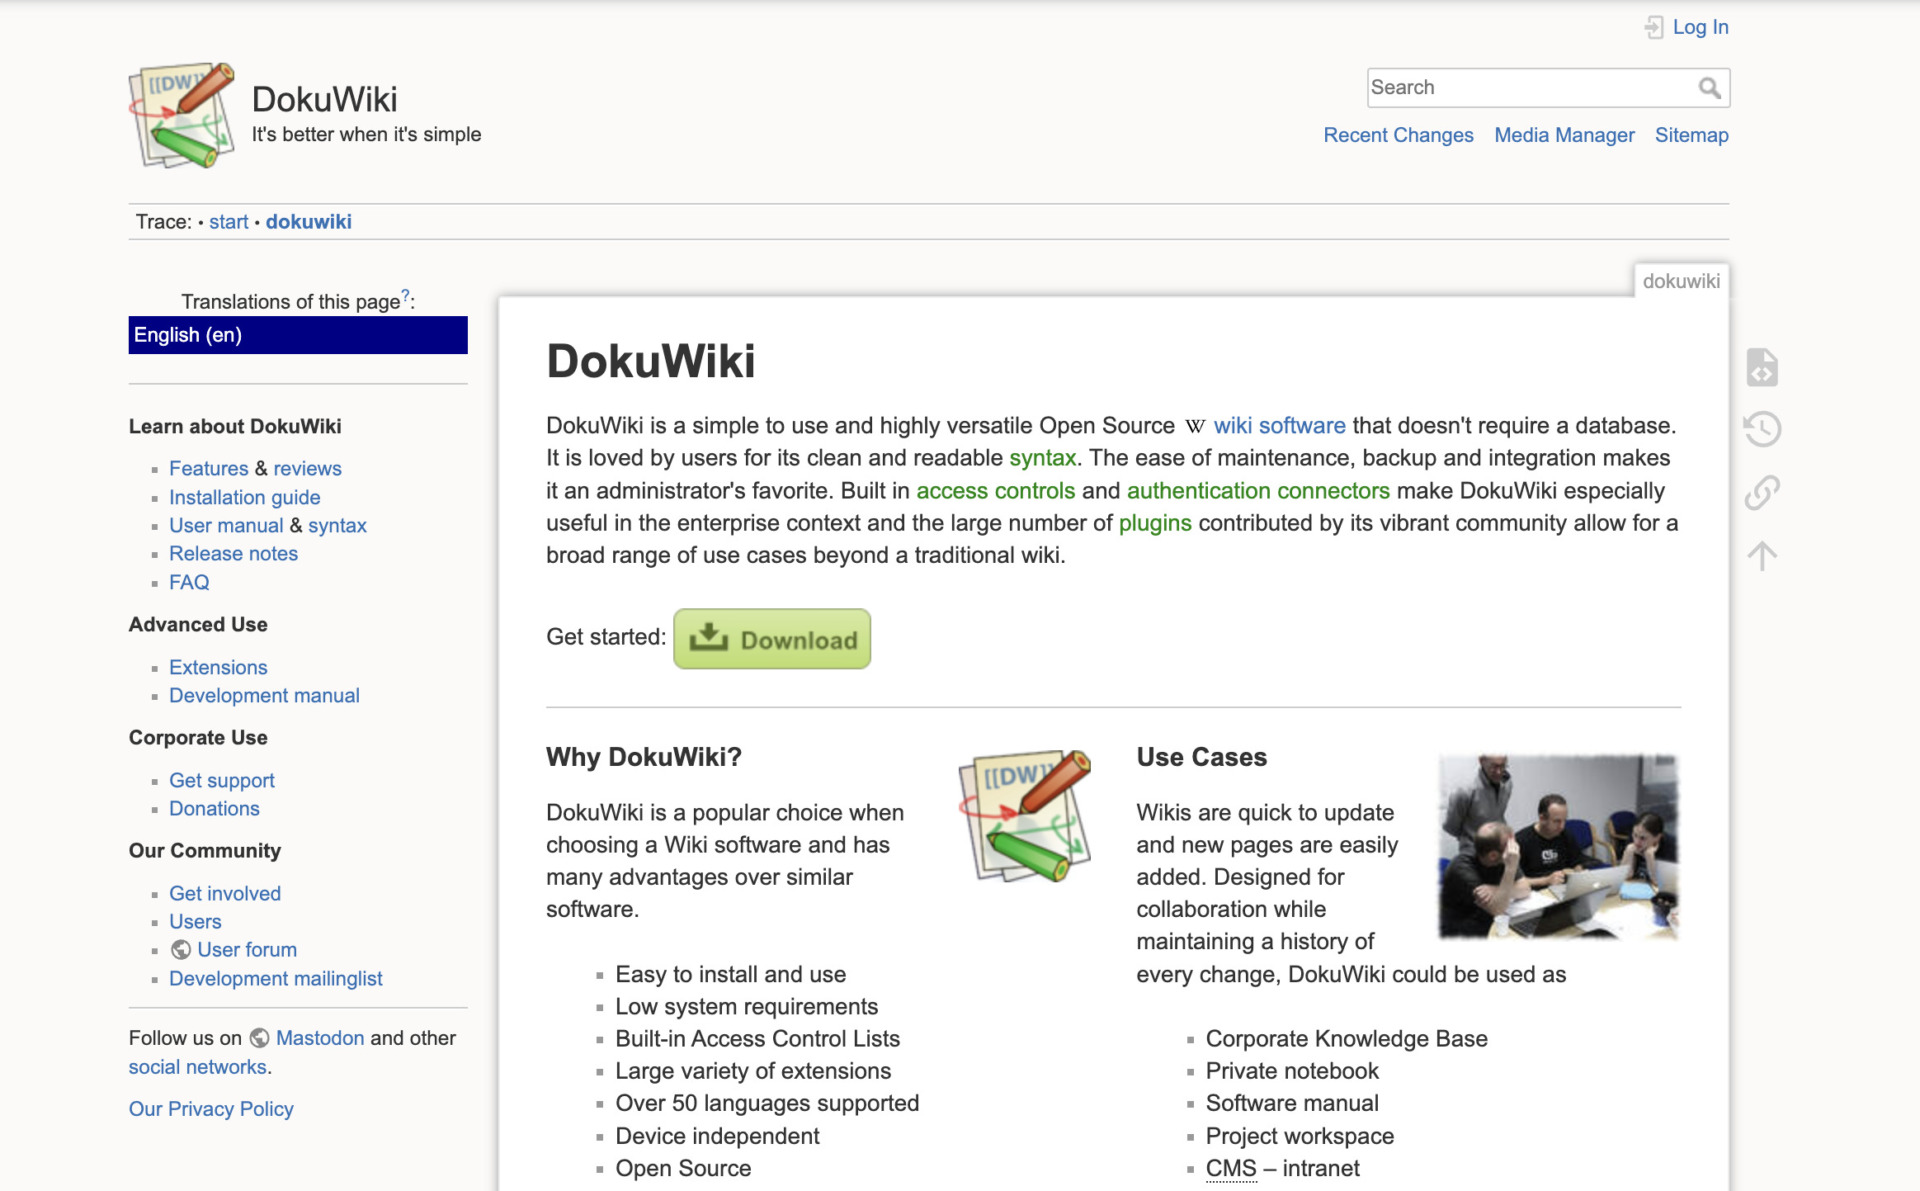 Top page of Dokuwiki